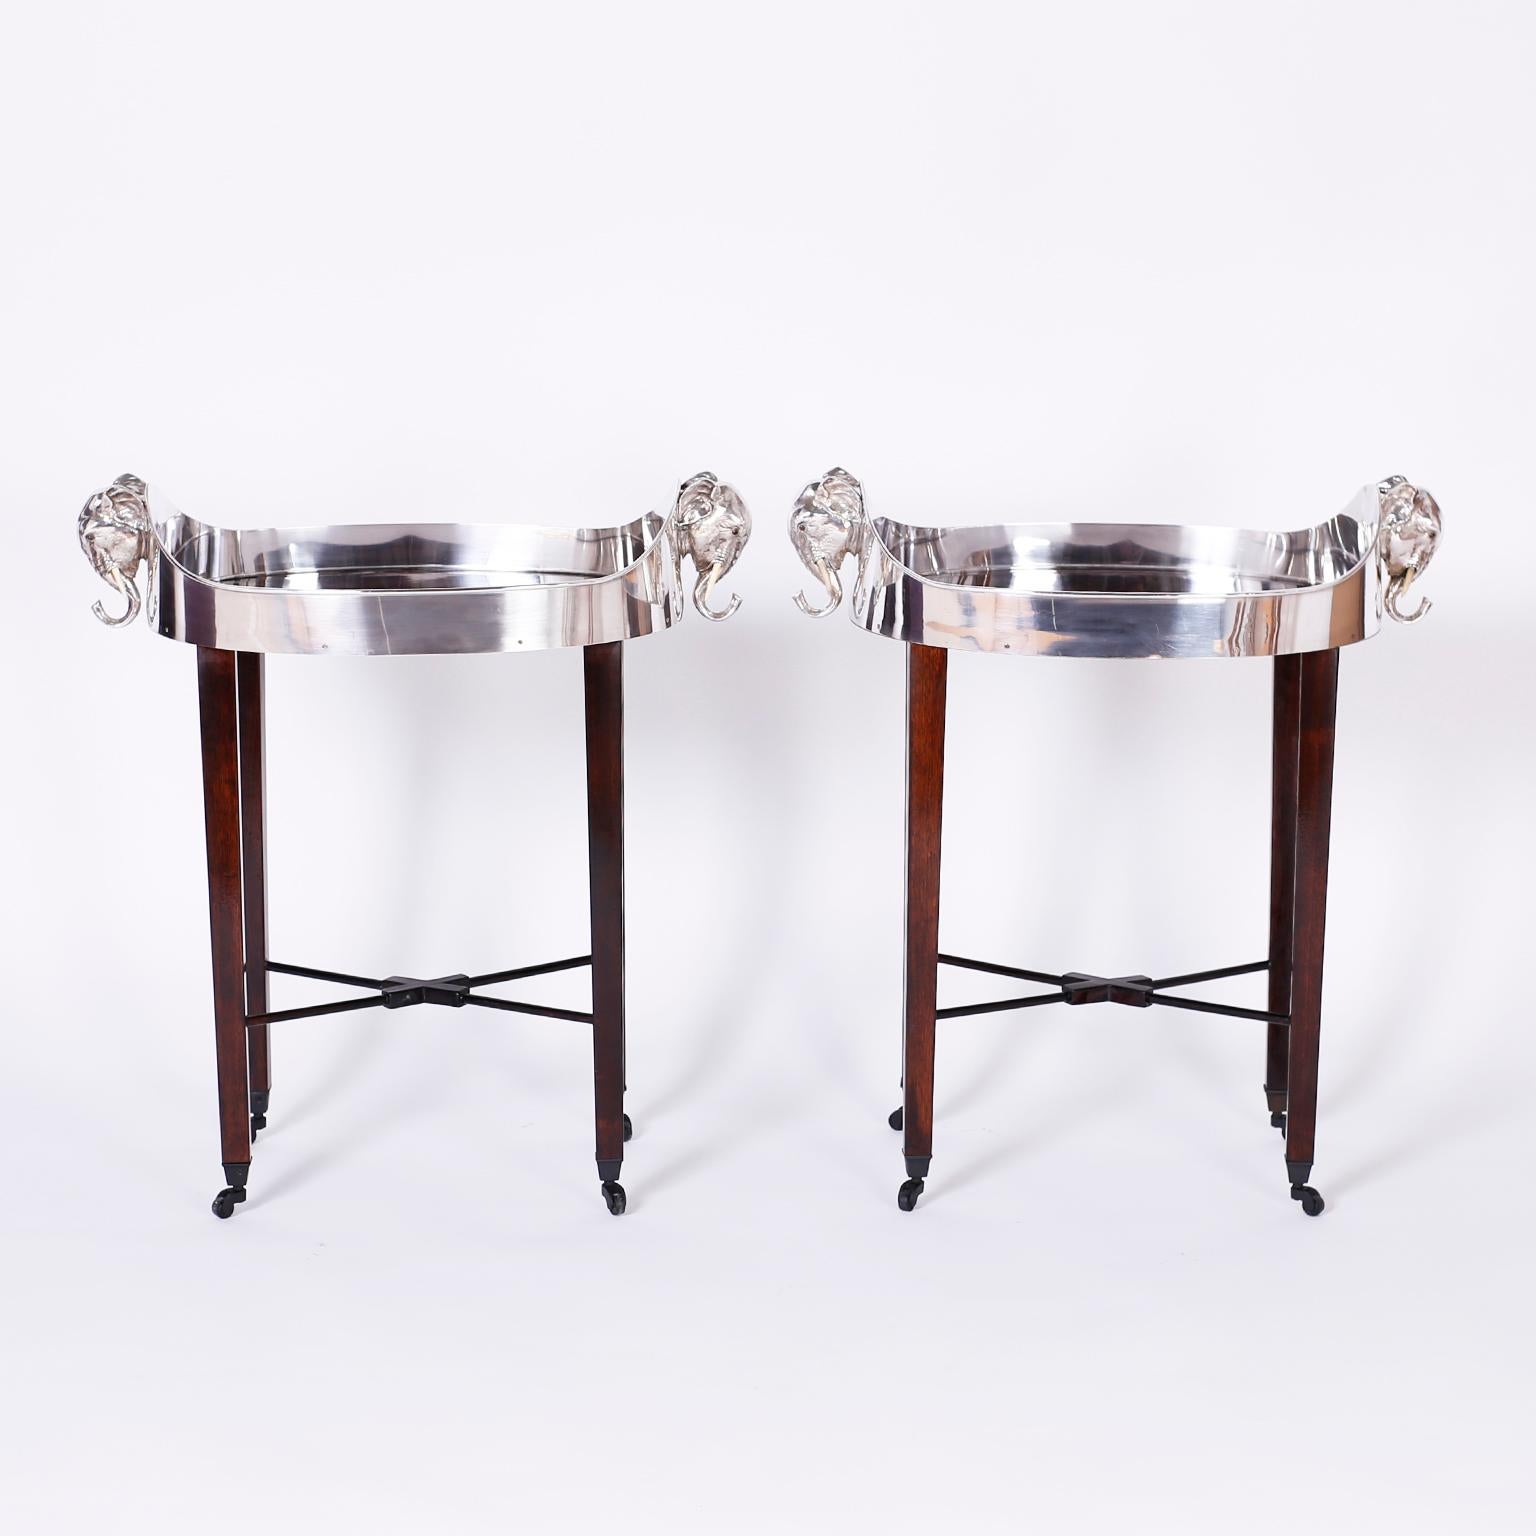 Mid-Century Modern Pair of Midcentury British Colonial Tray Tables with Elephant Head Handles